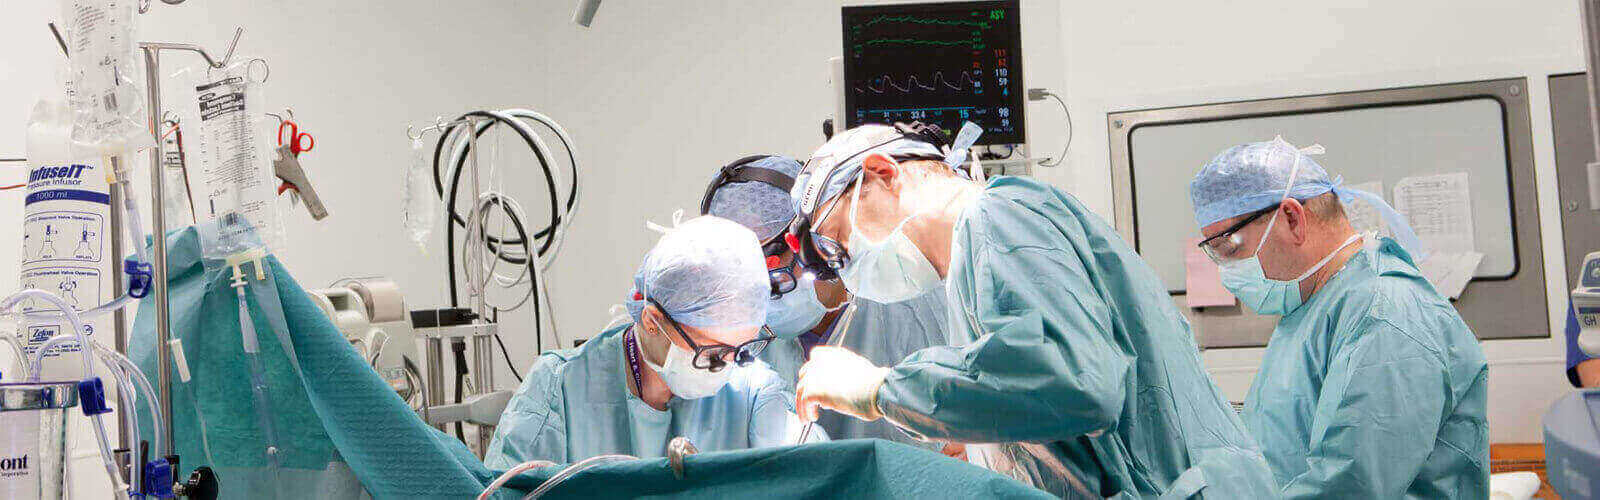 Heart Surgery Or Cardiac Surgery in Southend-on-sea